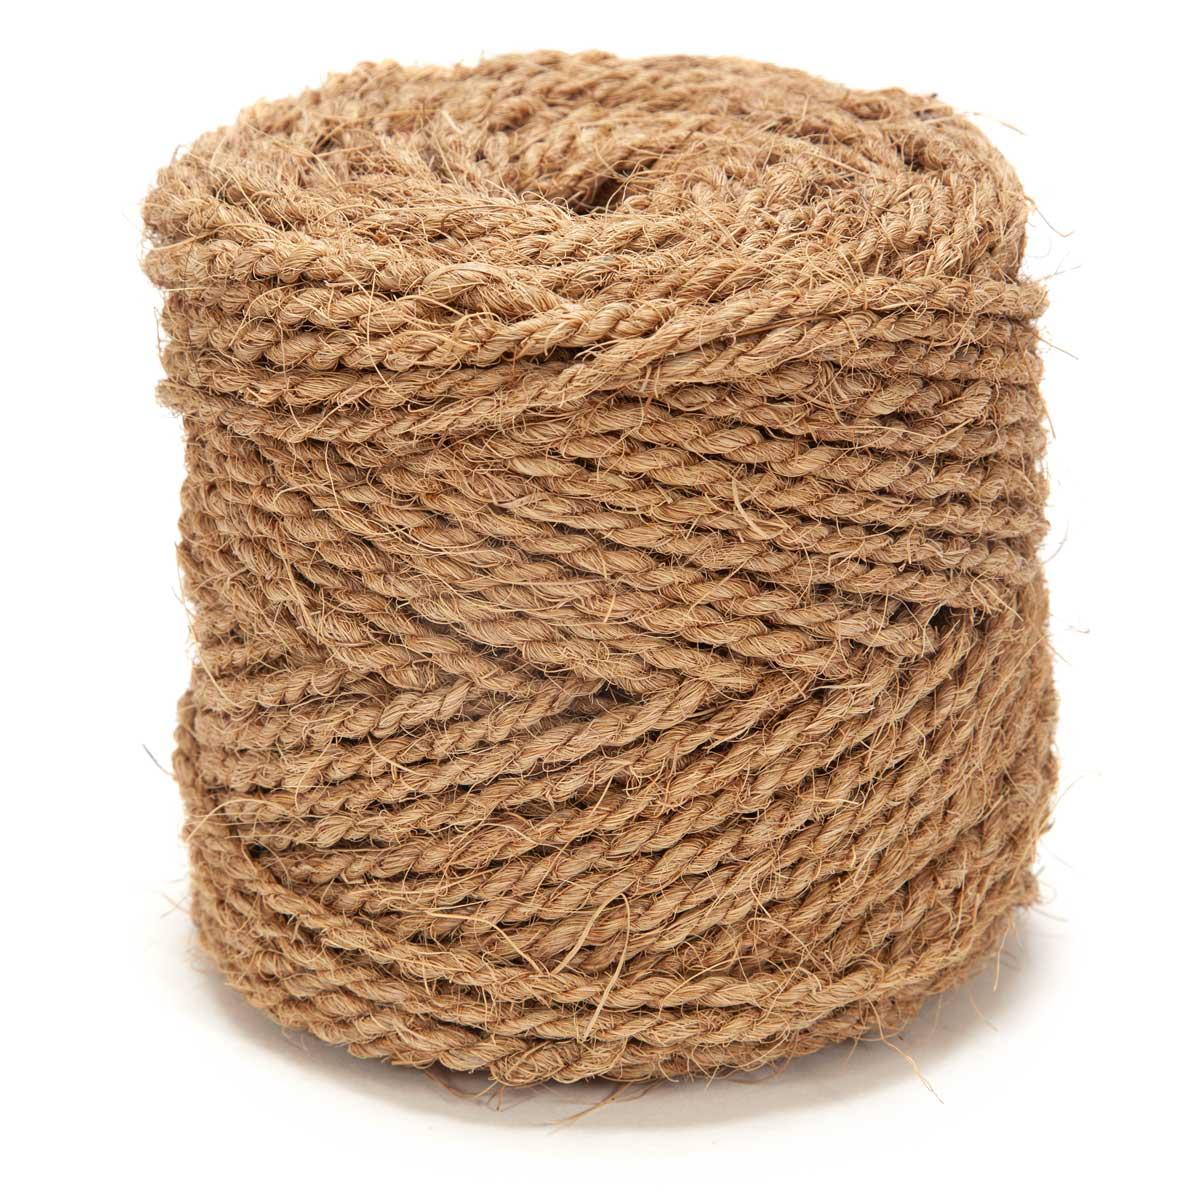 Twisted Coconut Husk Twine - 3/16 x 200' — Knot & Rope Supply